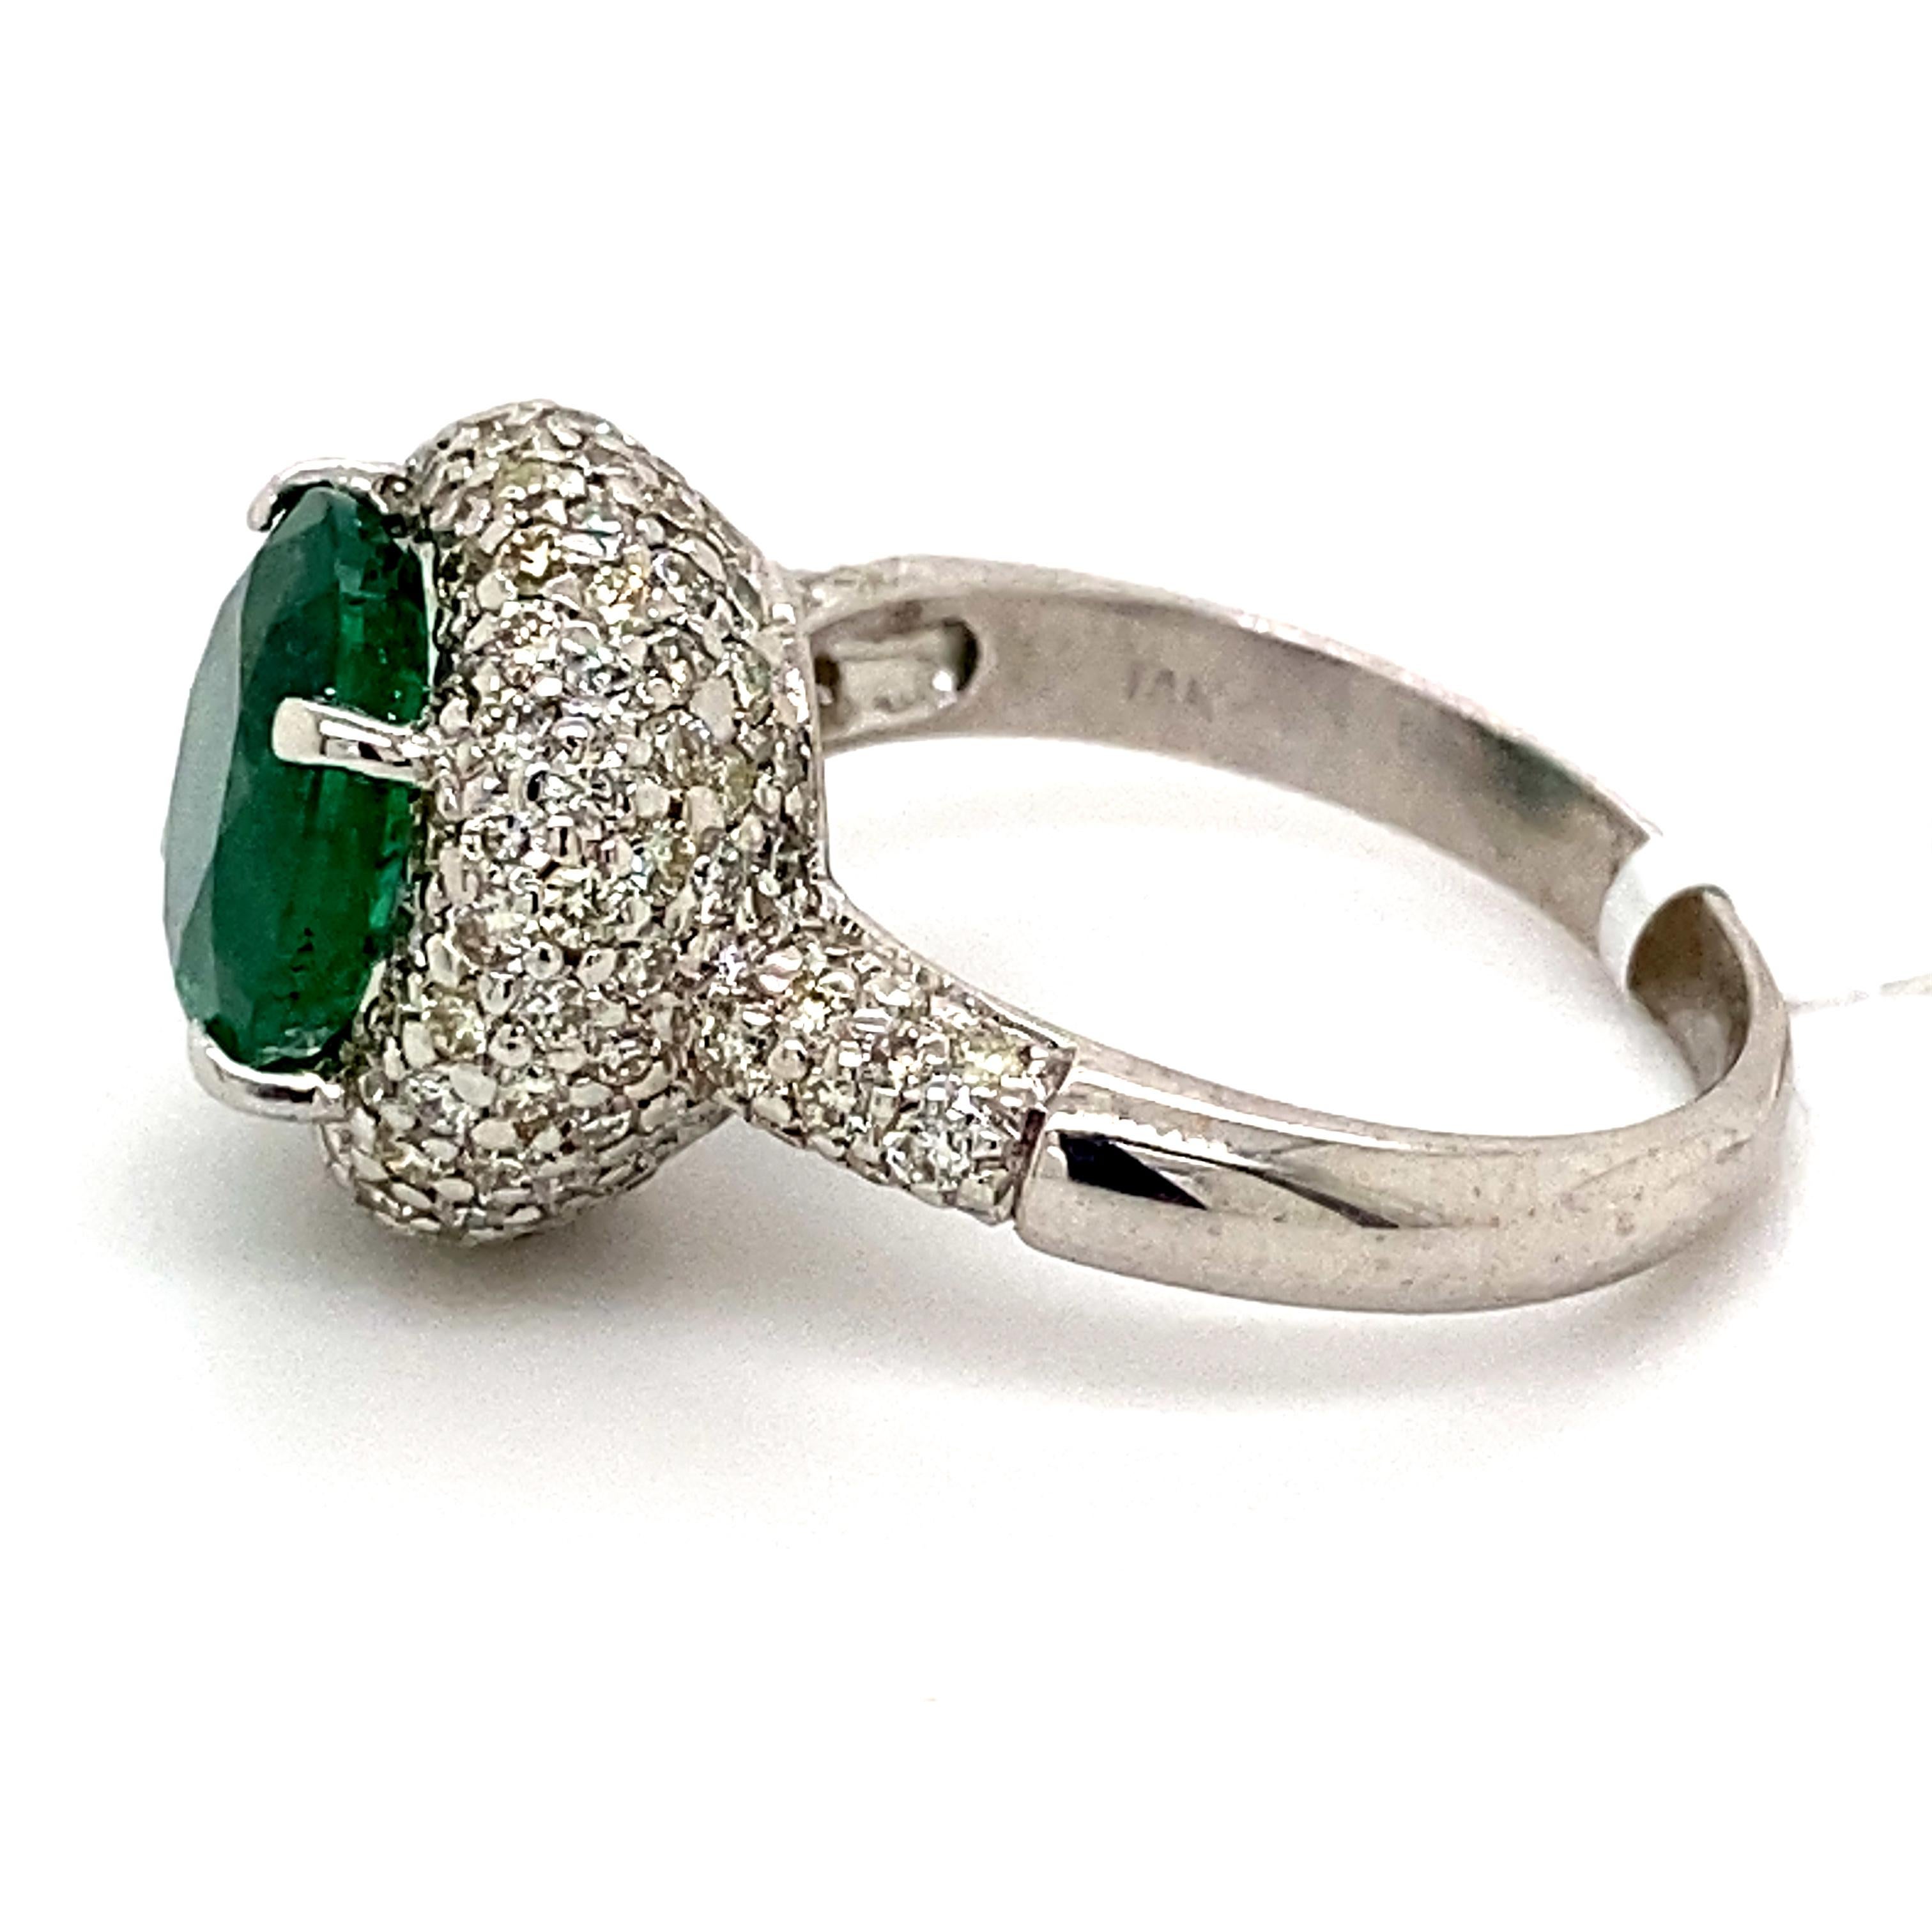 Contemporary 4.62ctt Carat Round Emerald with Diamond Pave Halo Ring 18k White Gold